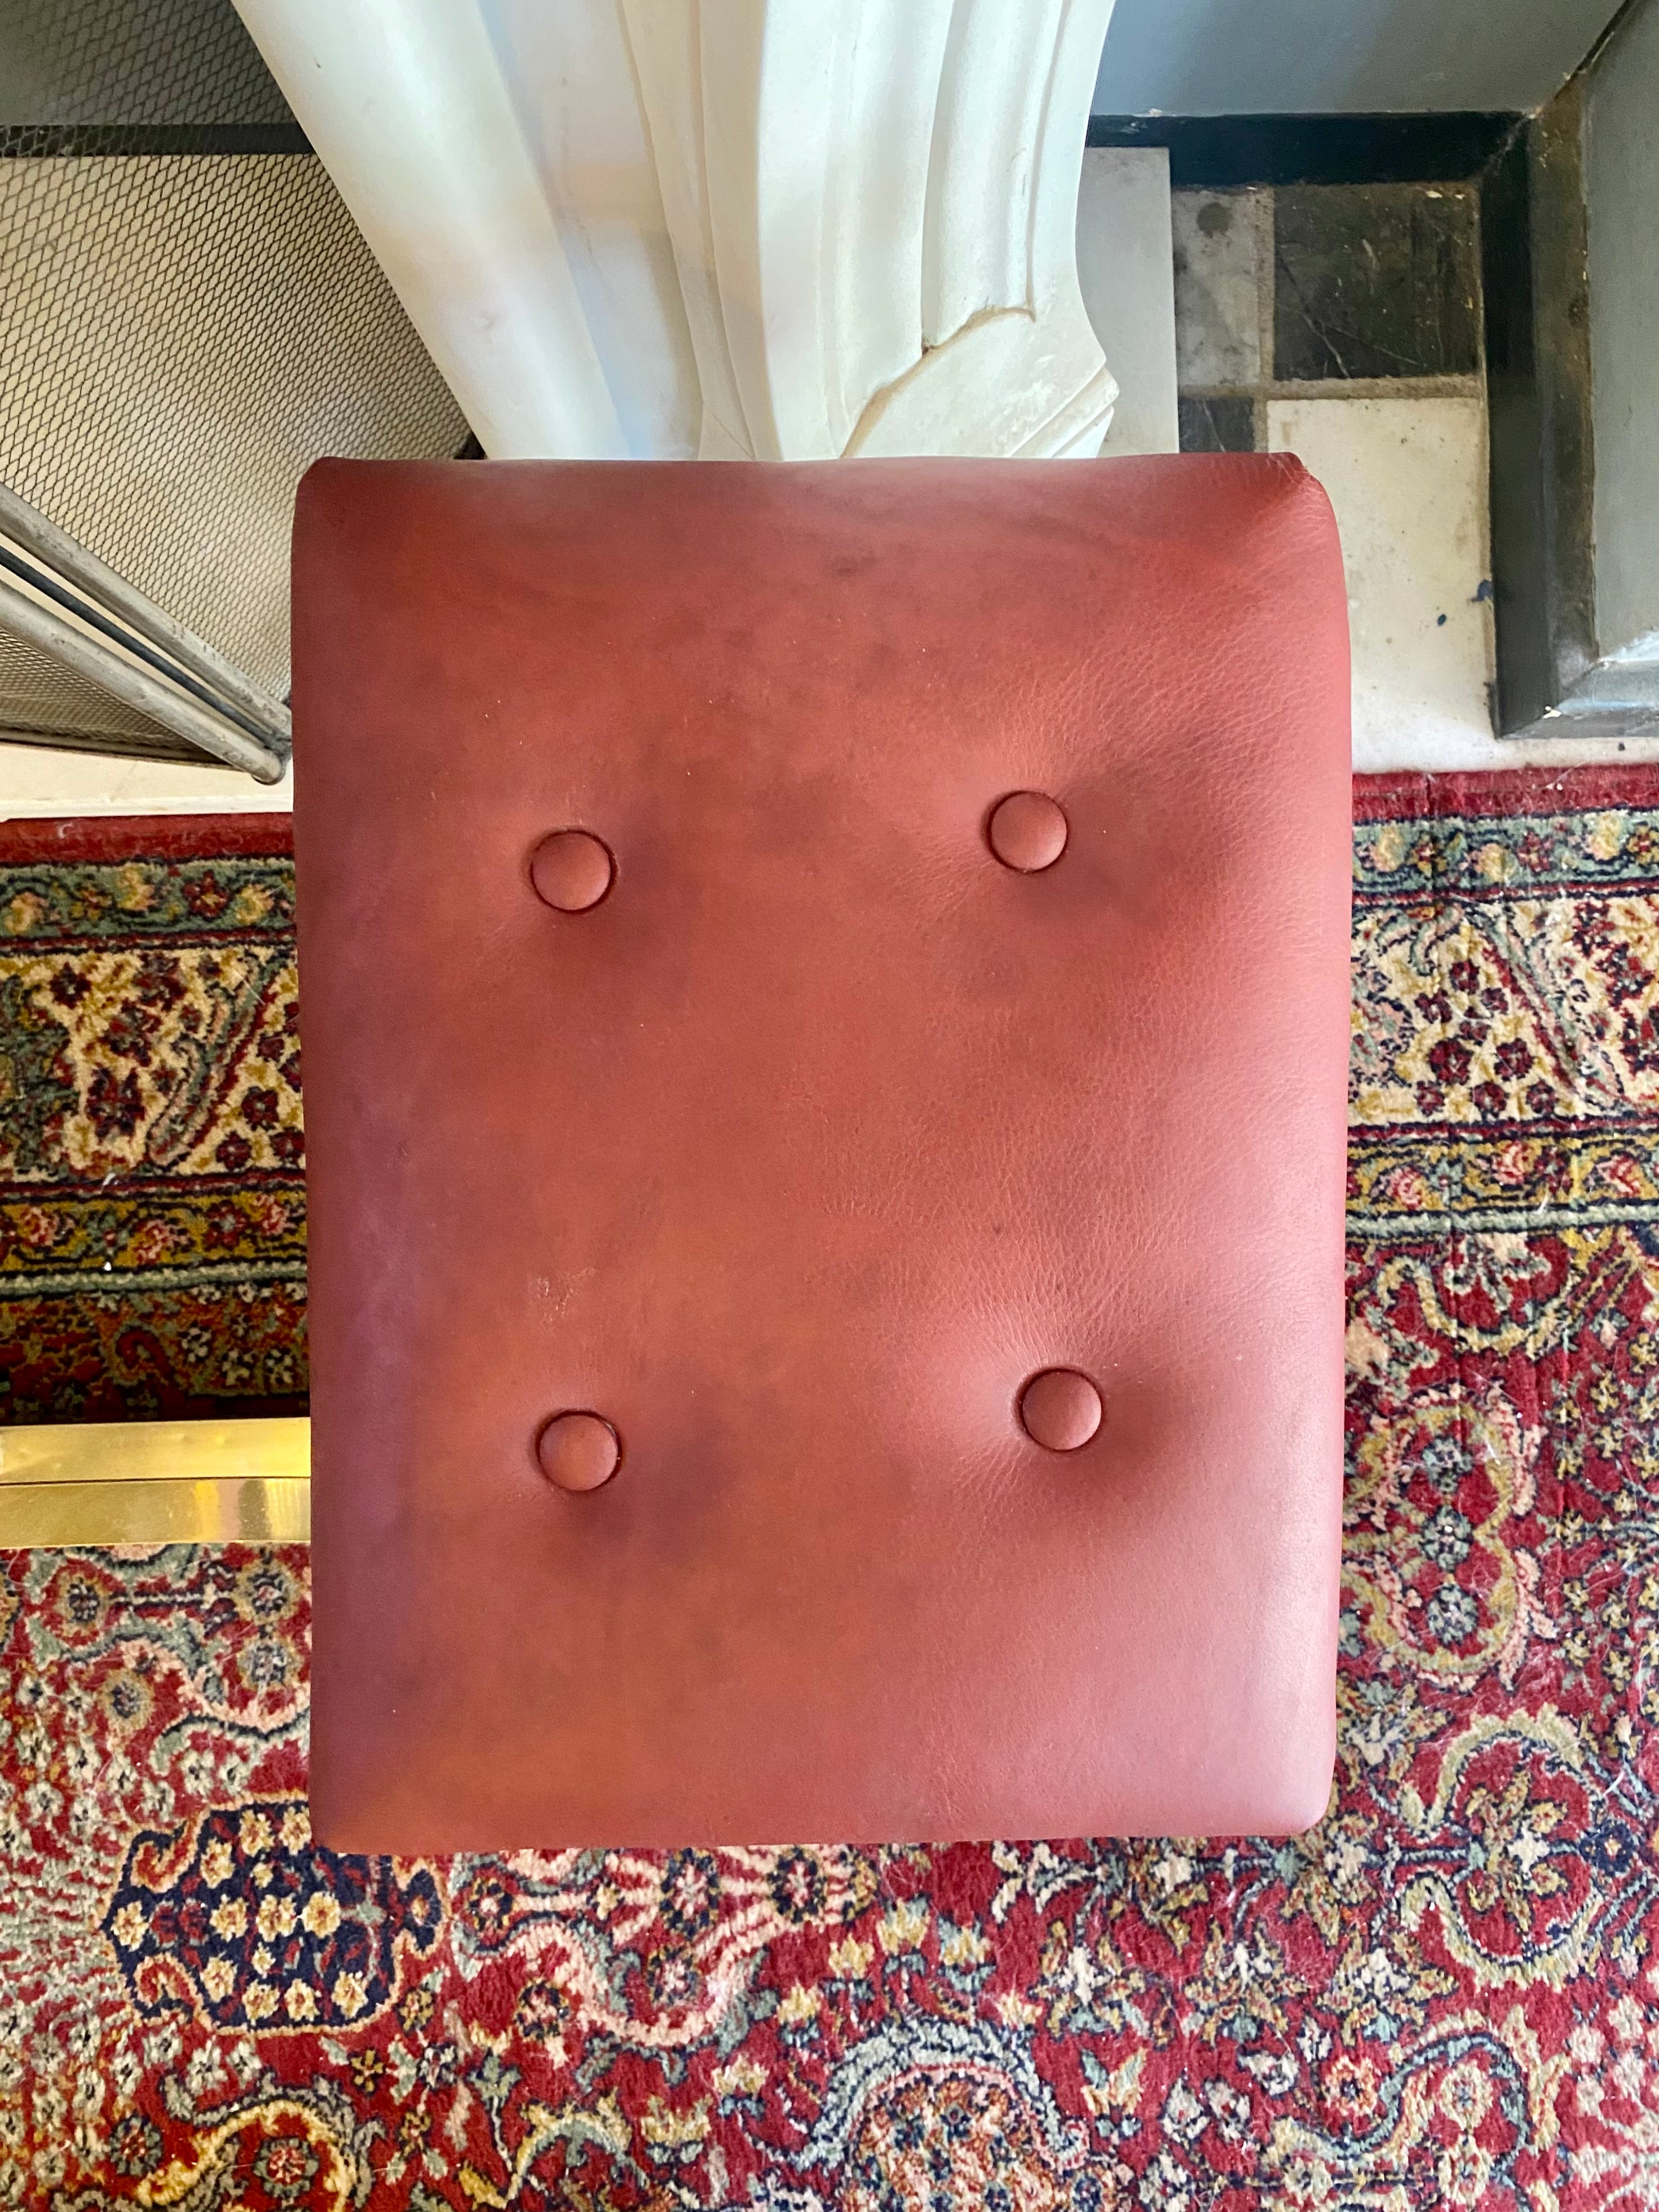 Antique Fire Guard with Leather Seats